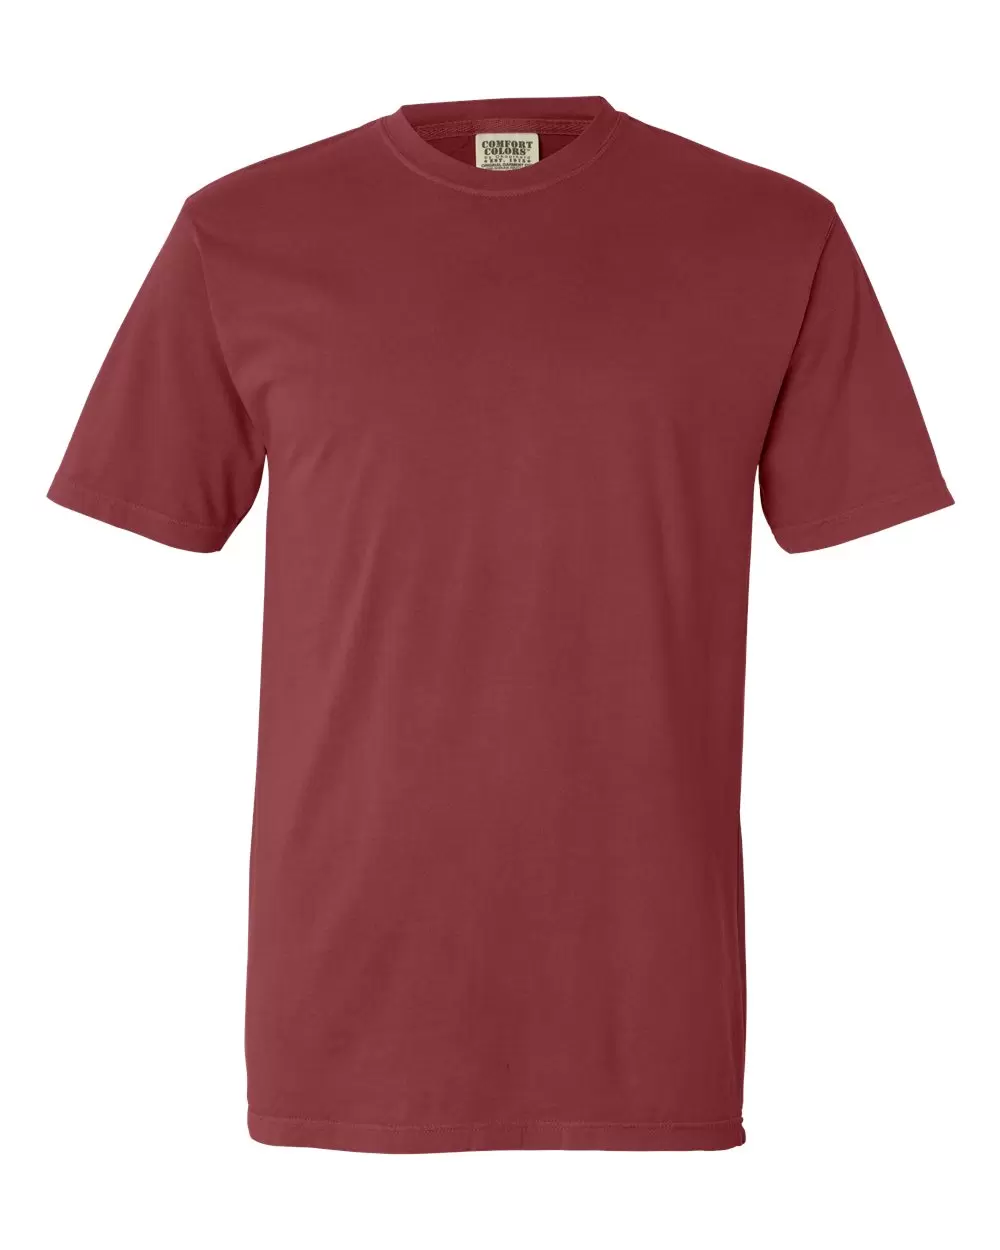 4017 Comfort Colors - Combed Ringspun Cotton T-Shirt - From $7.94